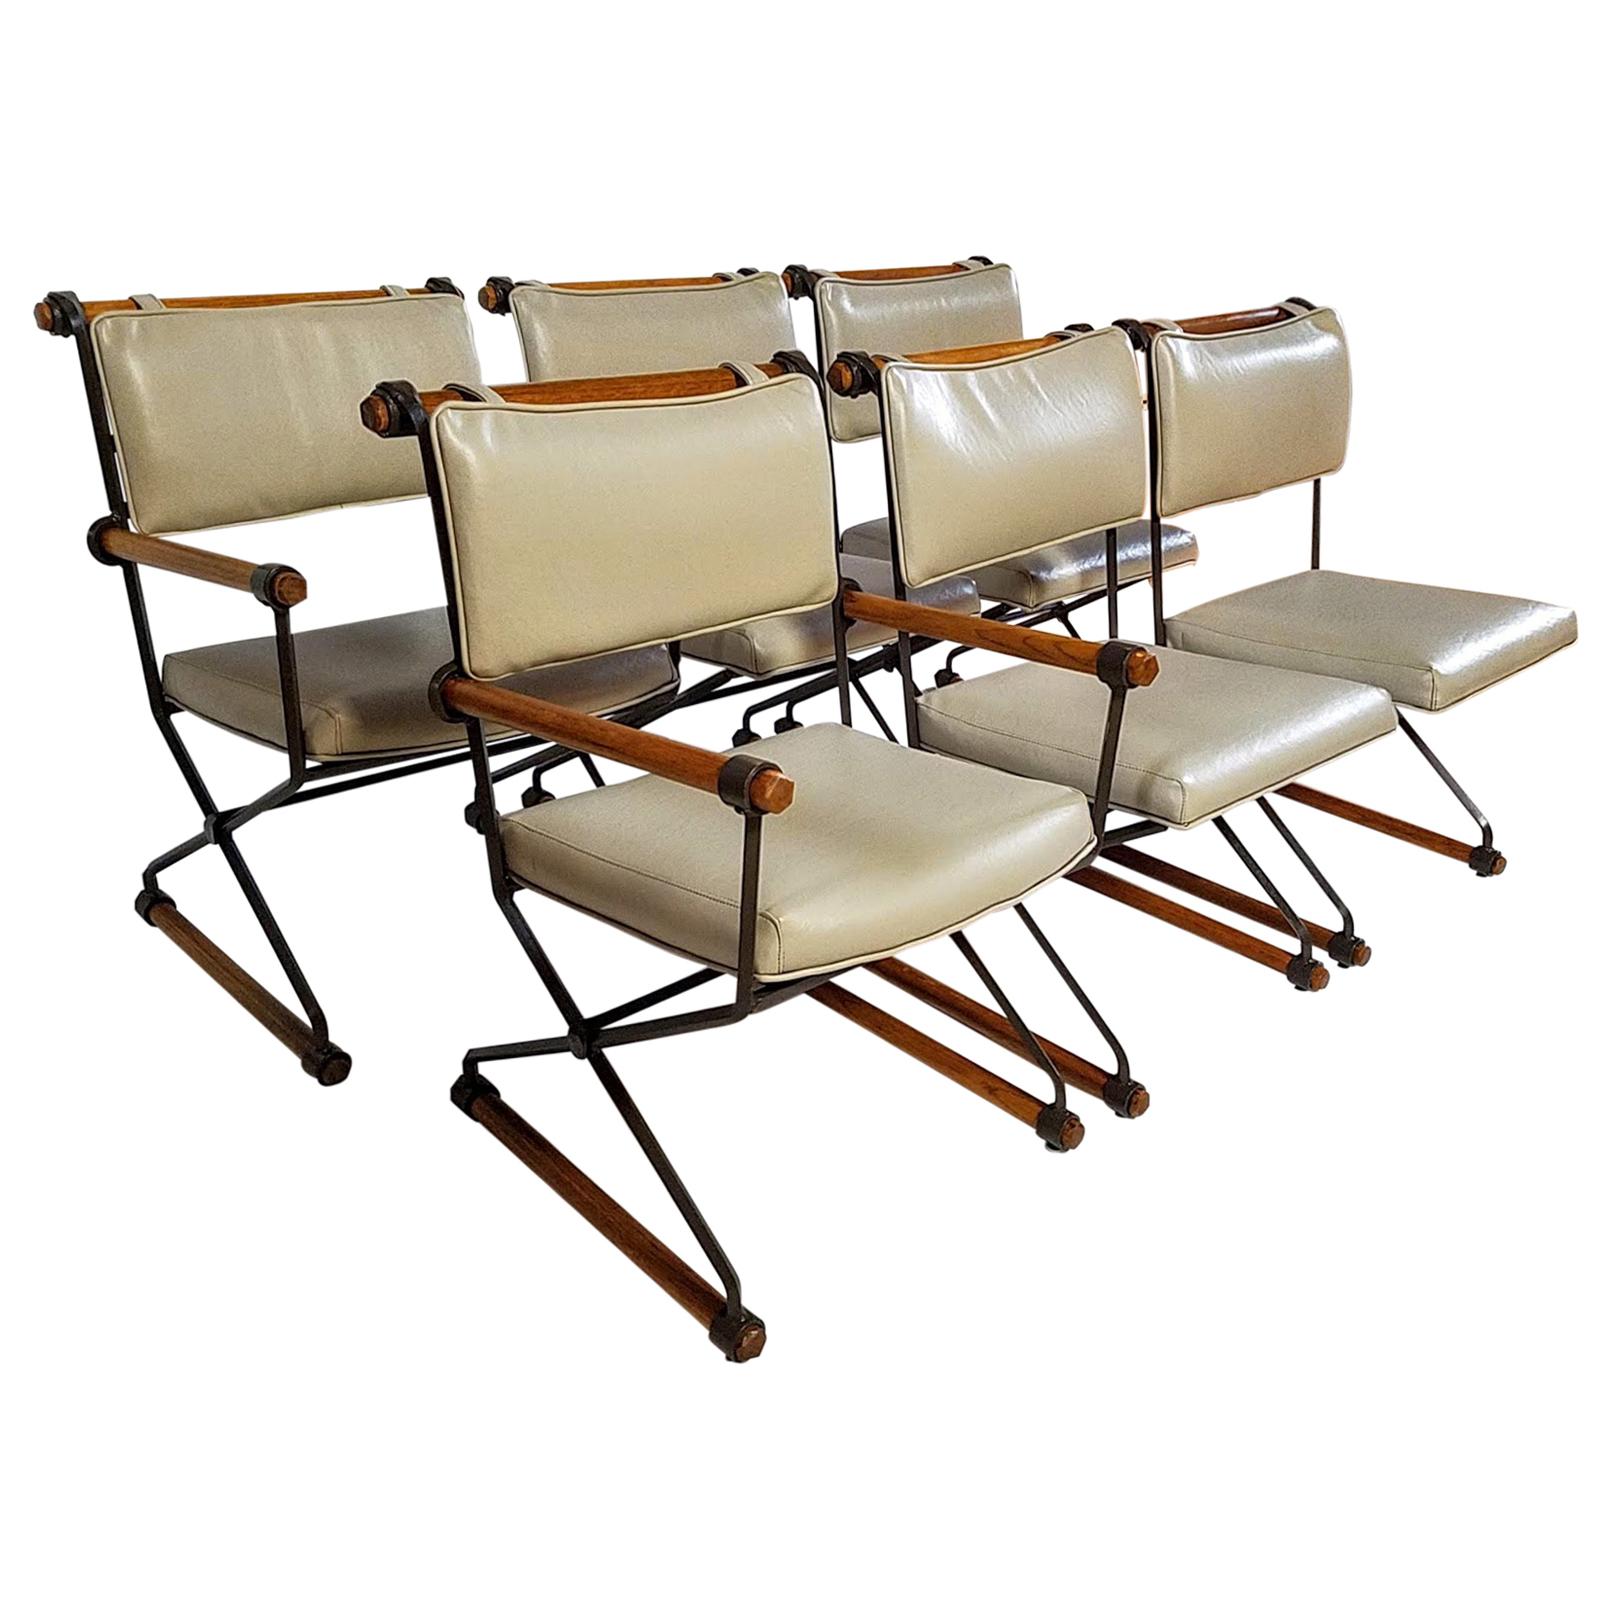 Six Cleo Baldon Chocolate Lacquer Wrought Iron Indoor Outdoor Chairs Terra, 1966